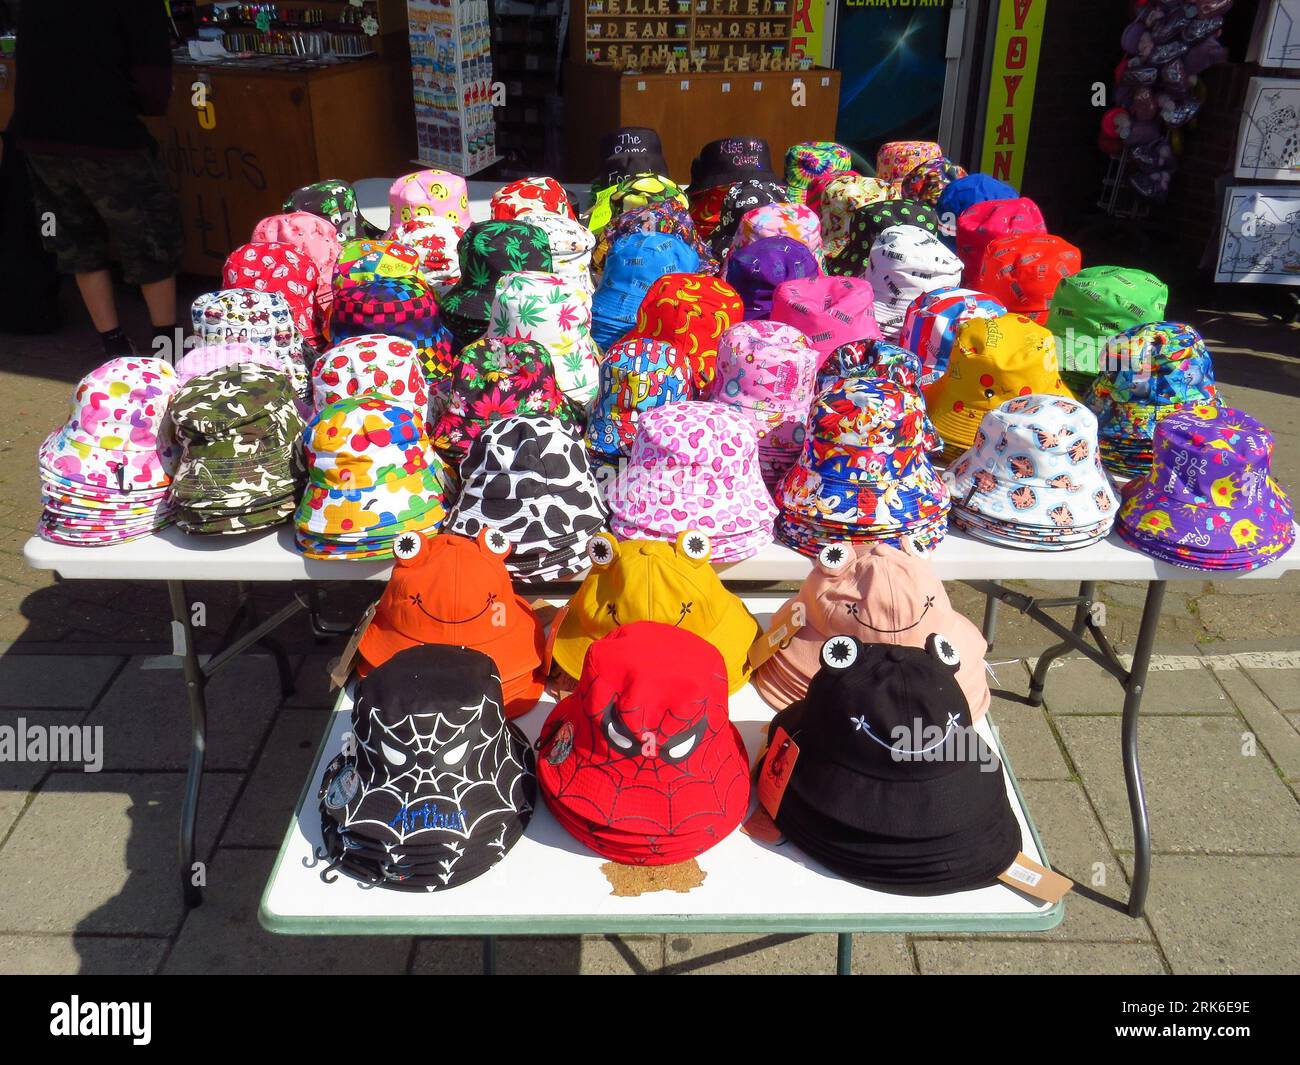 A stall with an assortment of colored hats for sale Stock Photo